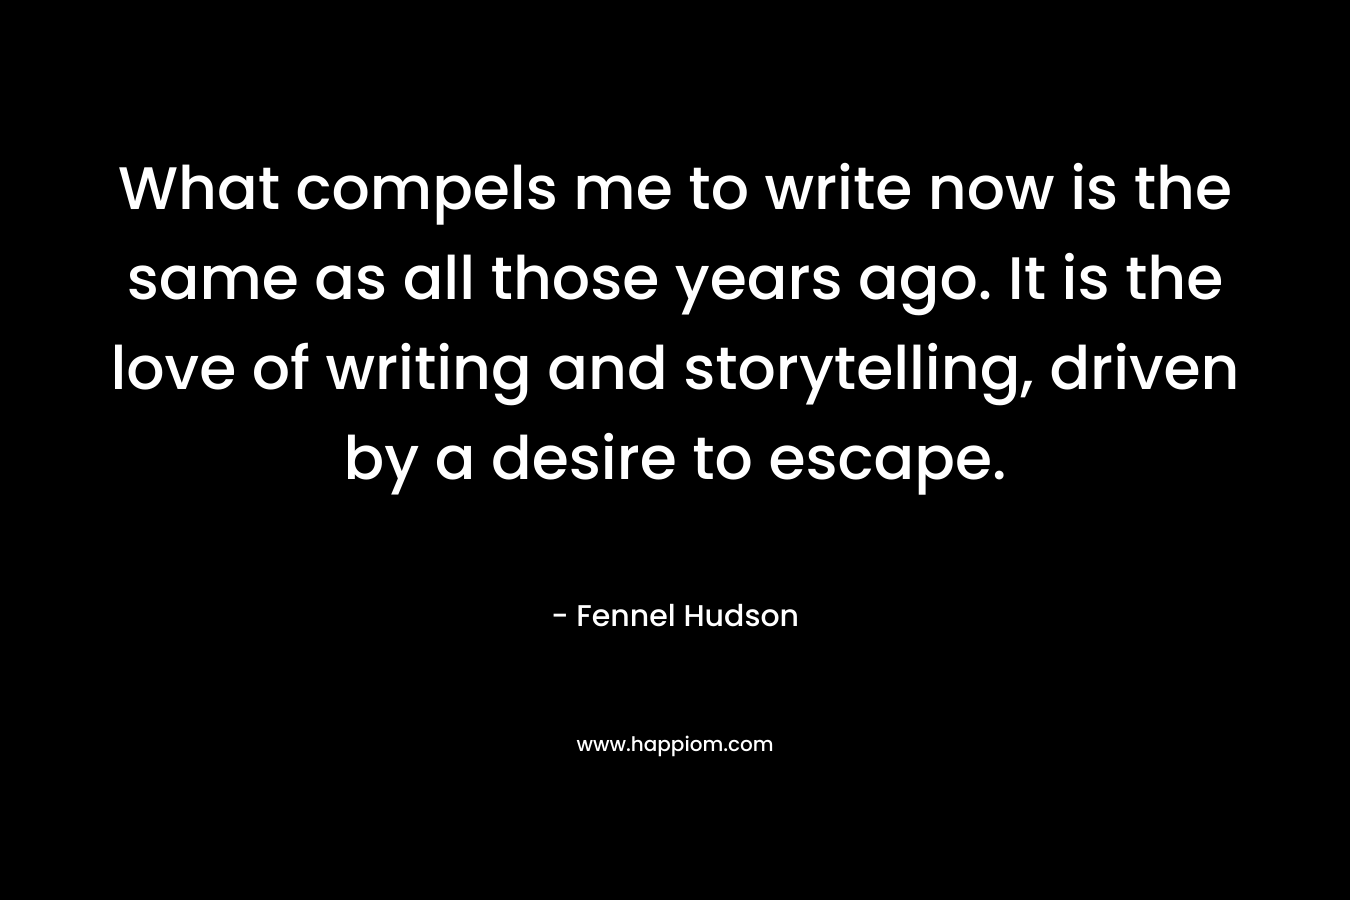 What compels me to write now is the same as all those years ago. It is the love of writing and storytelling, driven by a desire to escape.